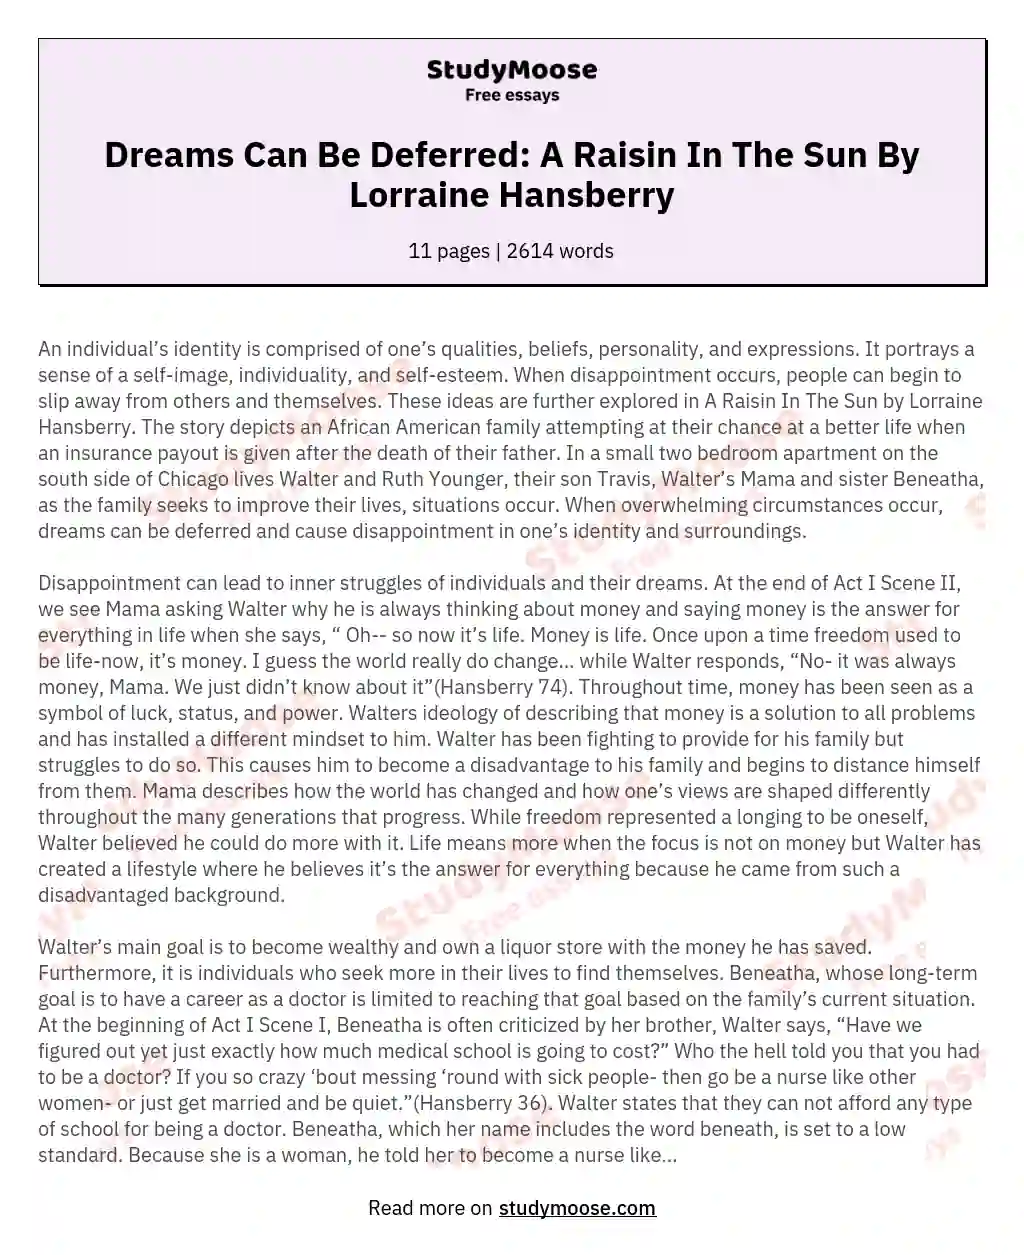 Dreams Can Be Deferred: A Raisin In The Sun By Lorraine Hansberry essay